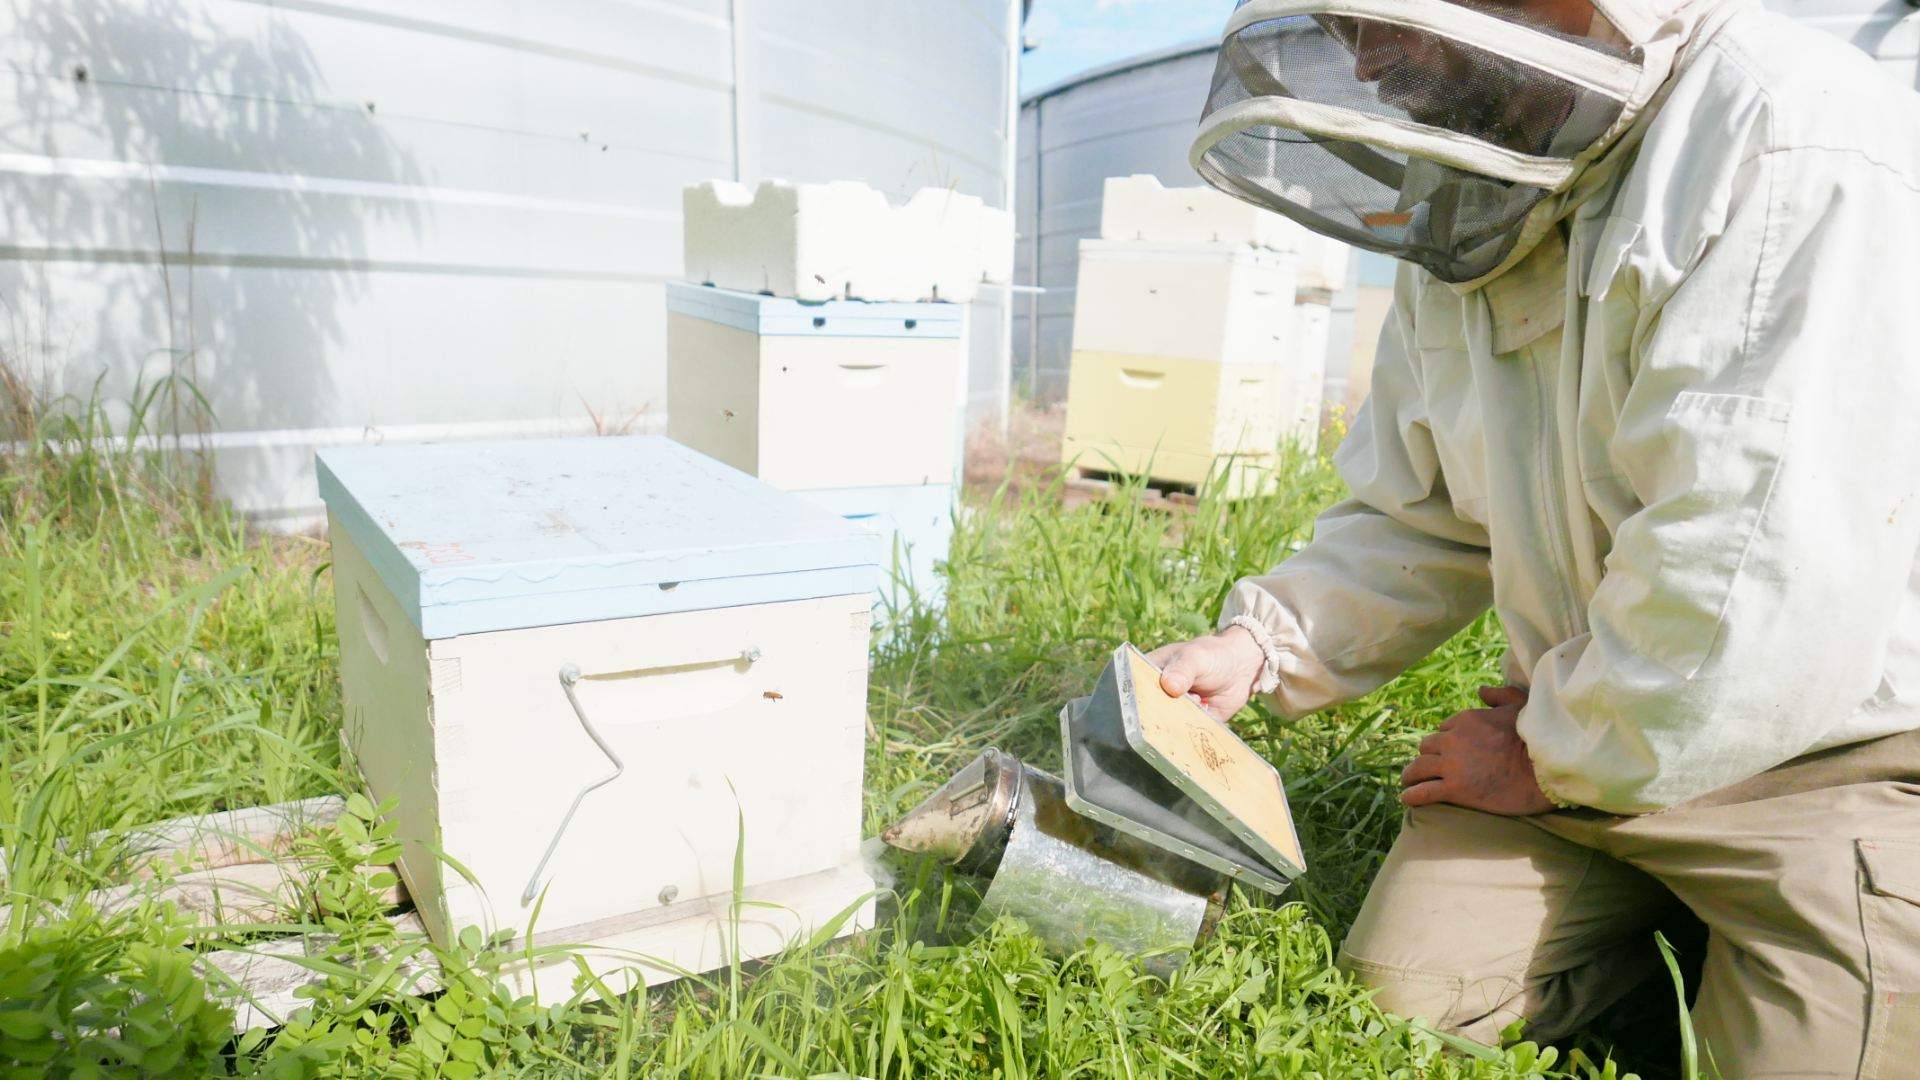 Alphington Will Soon Be Home to a Community Beekeeping School